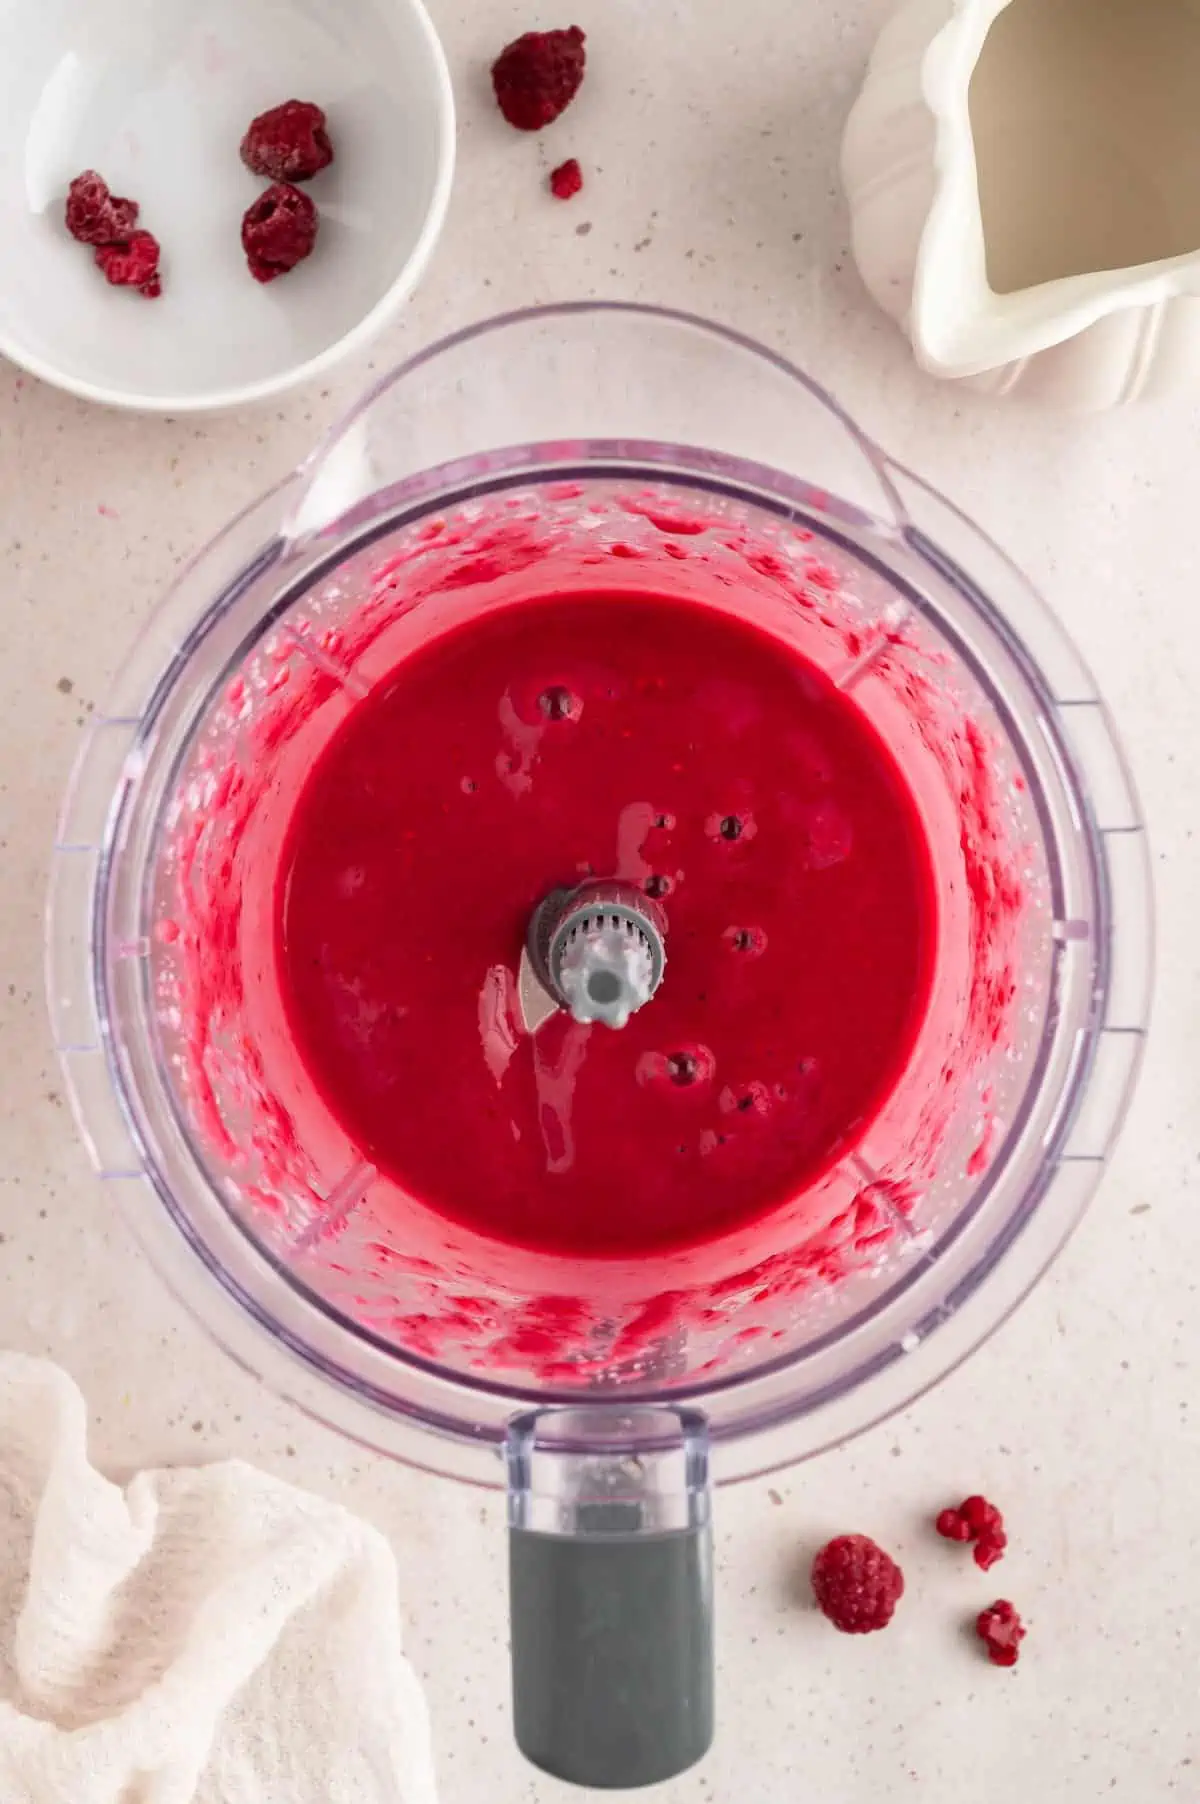 A raspberry smoothie blended in a blender.